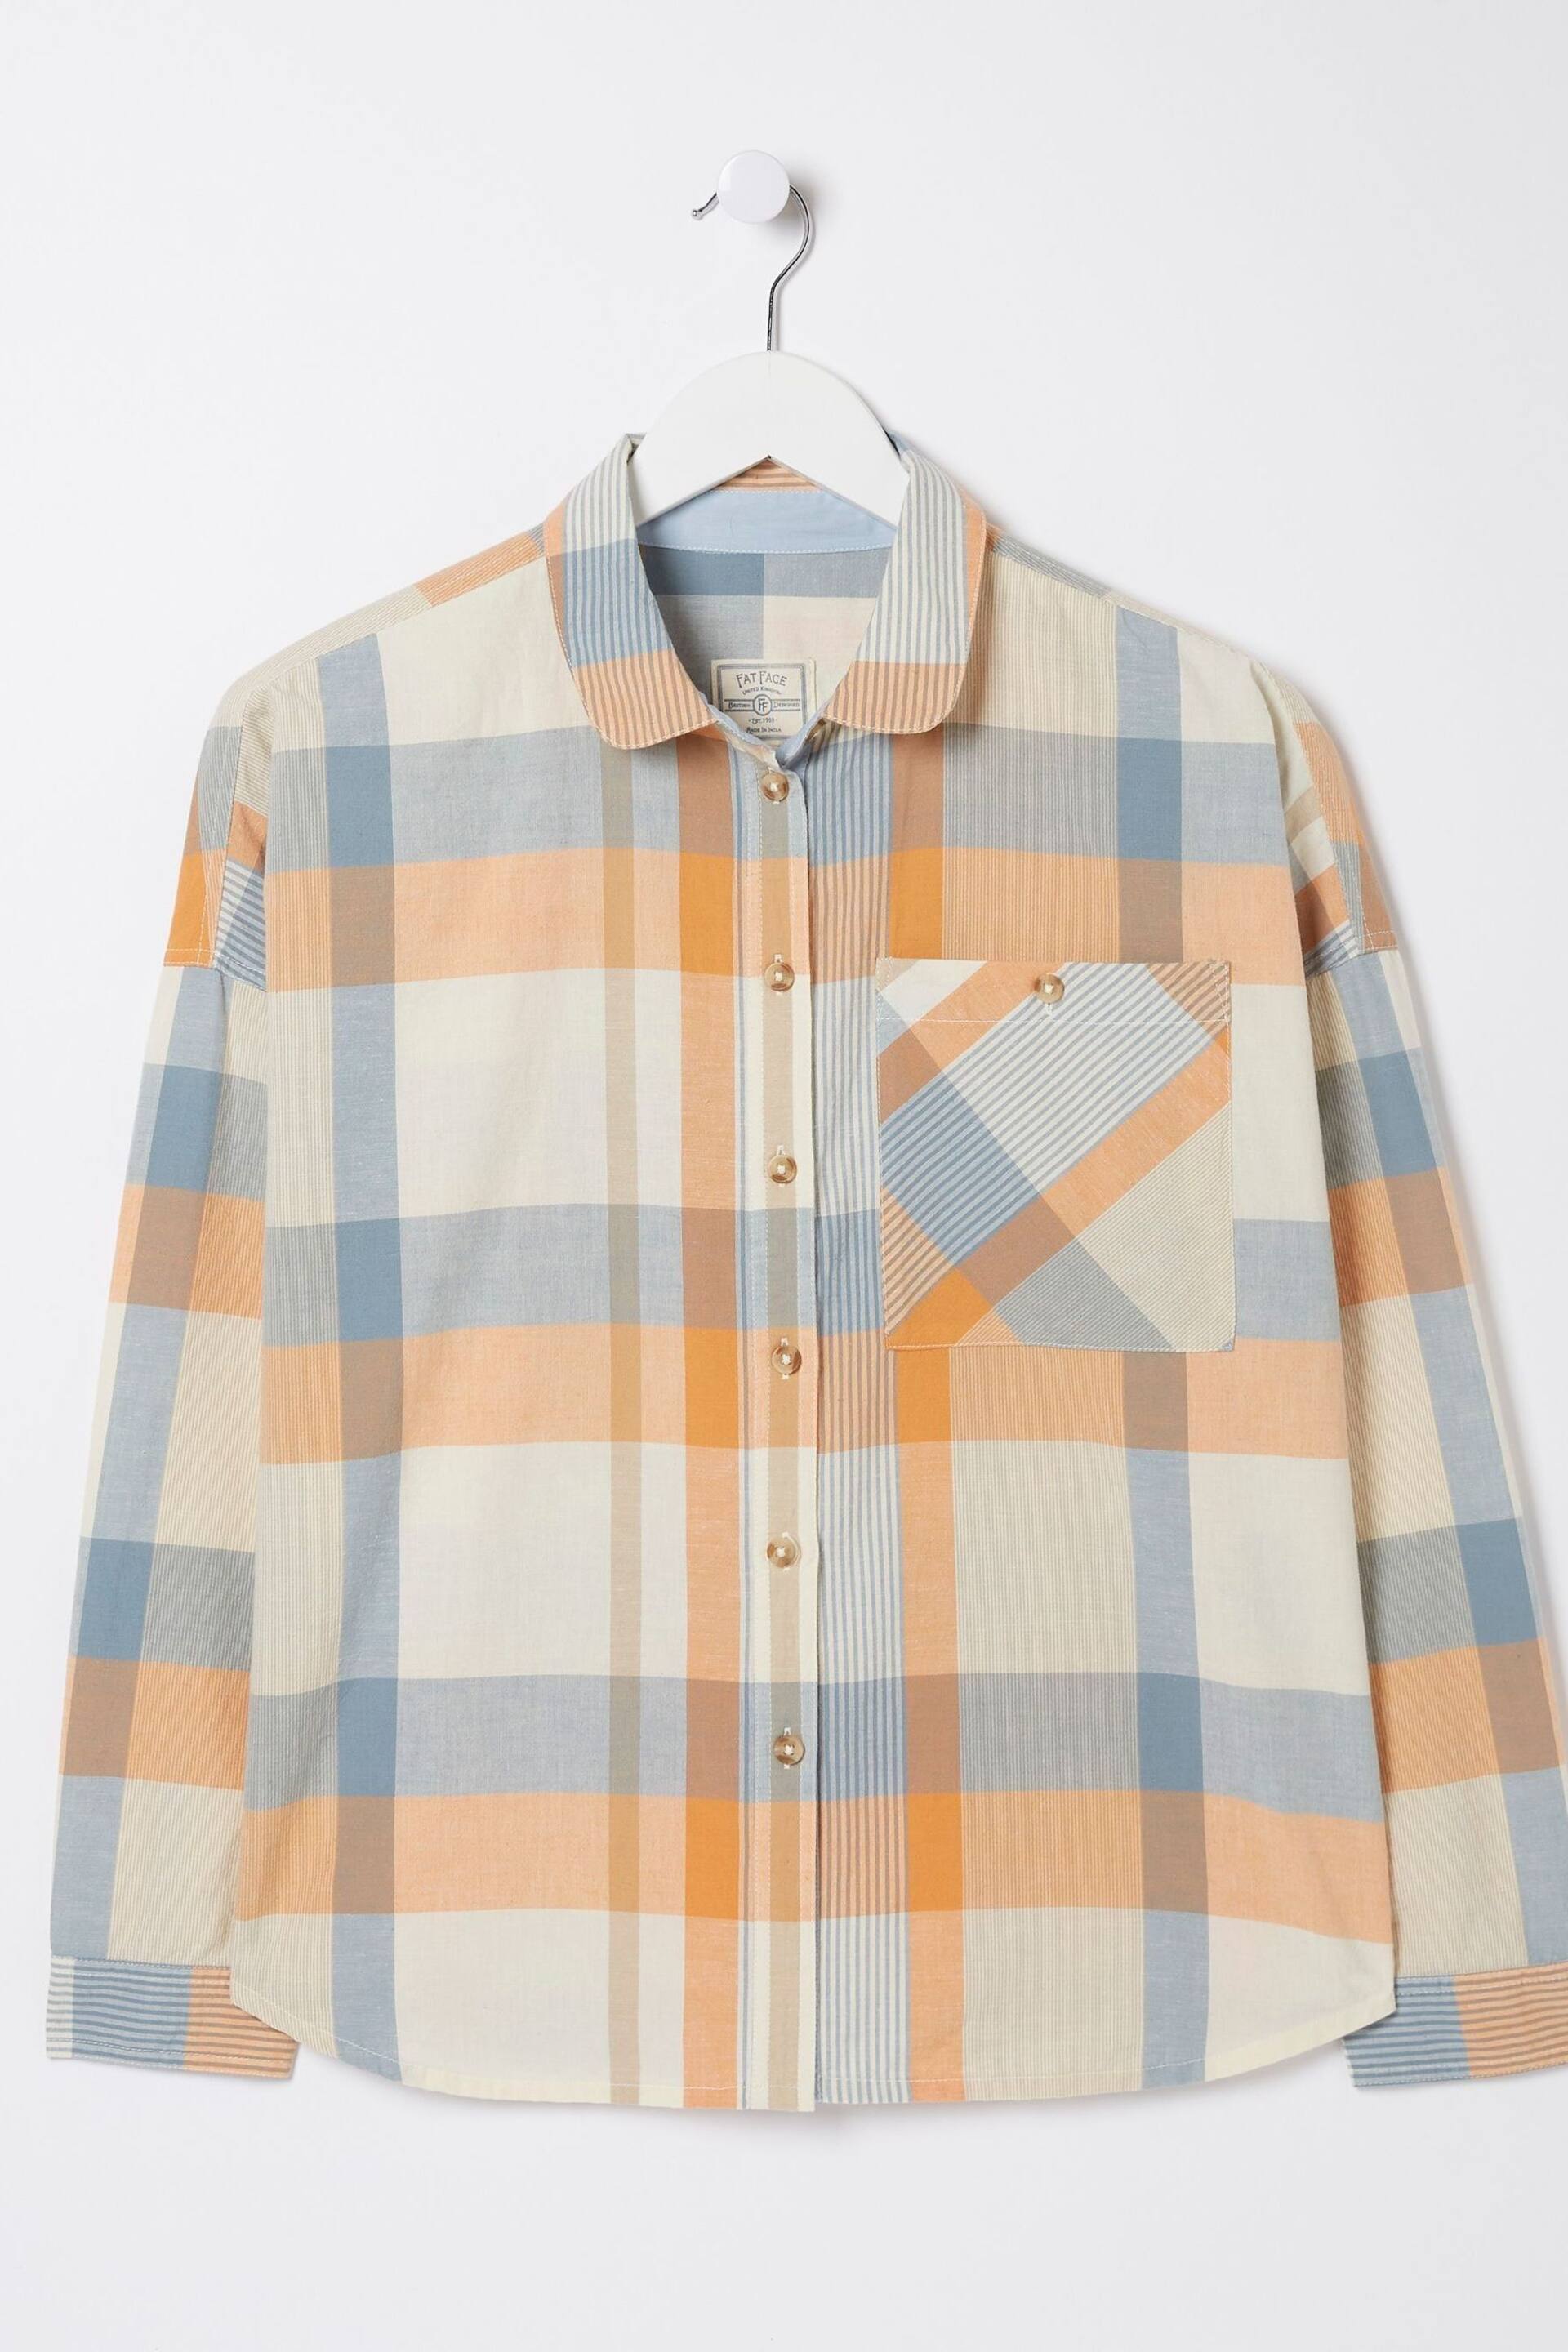 FatFace Multi Frome Check Shirt - Image 4 of 4